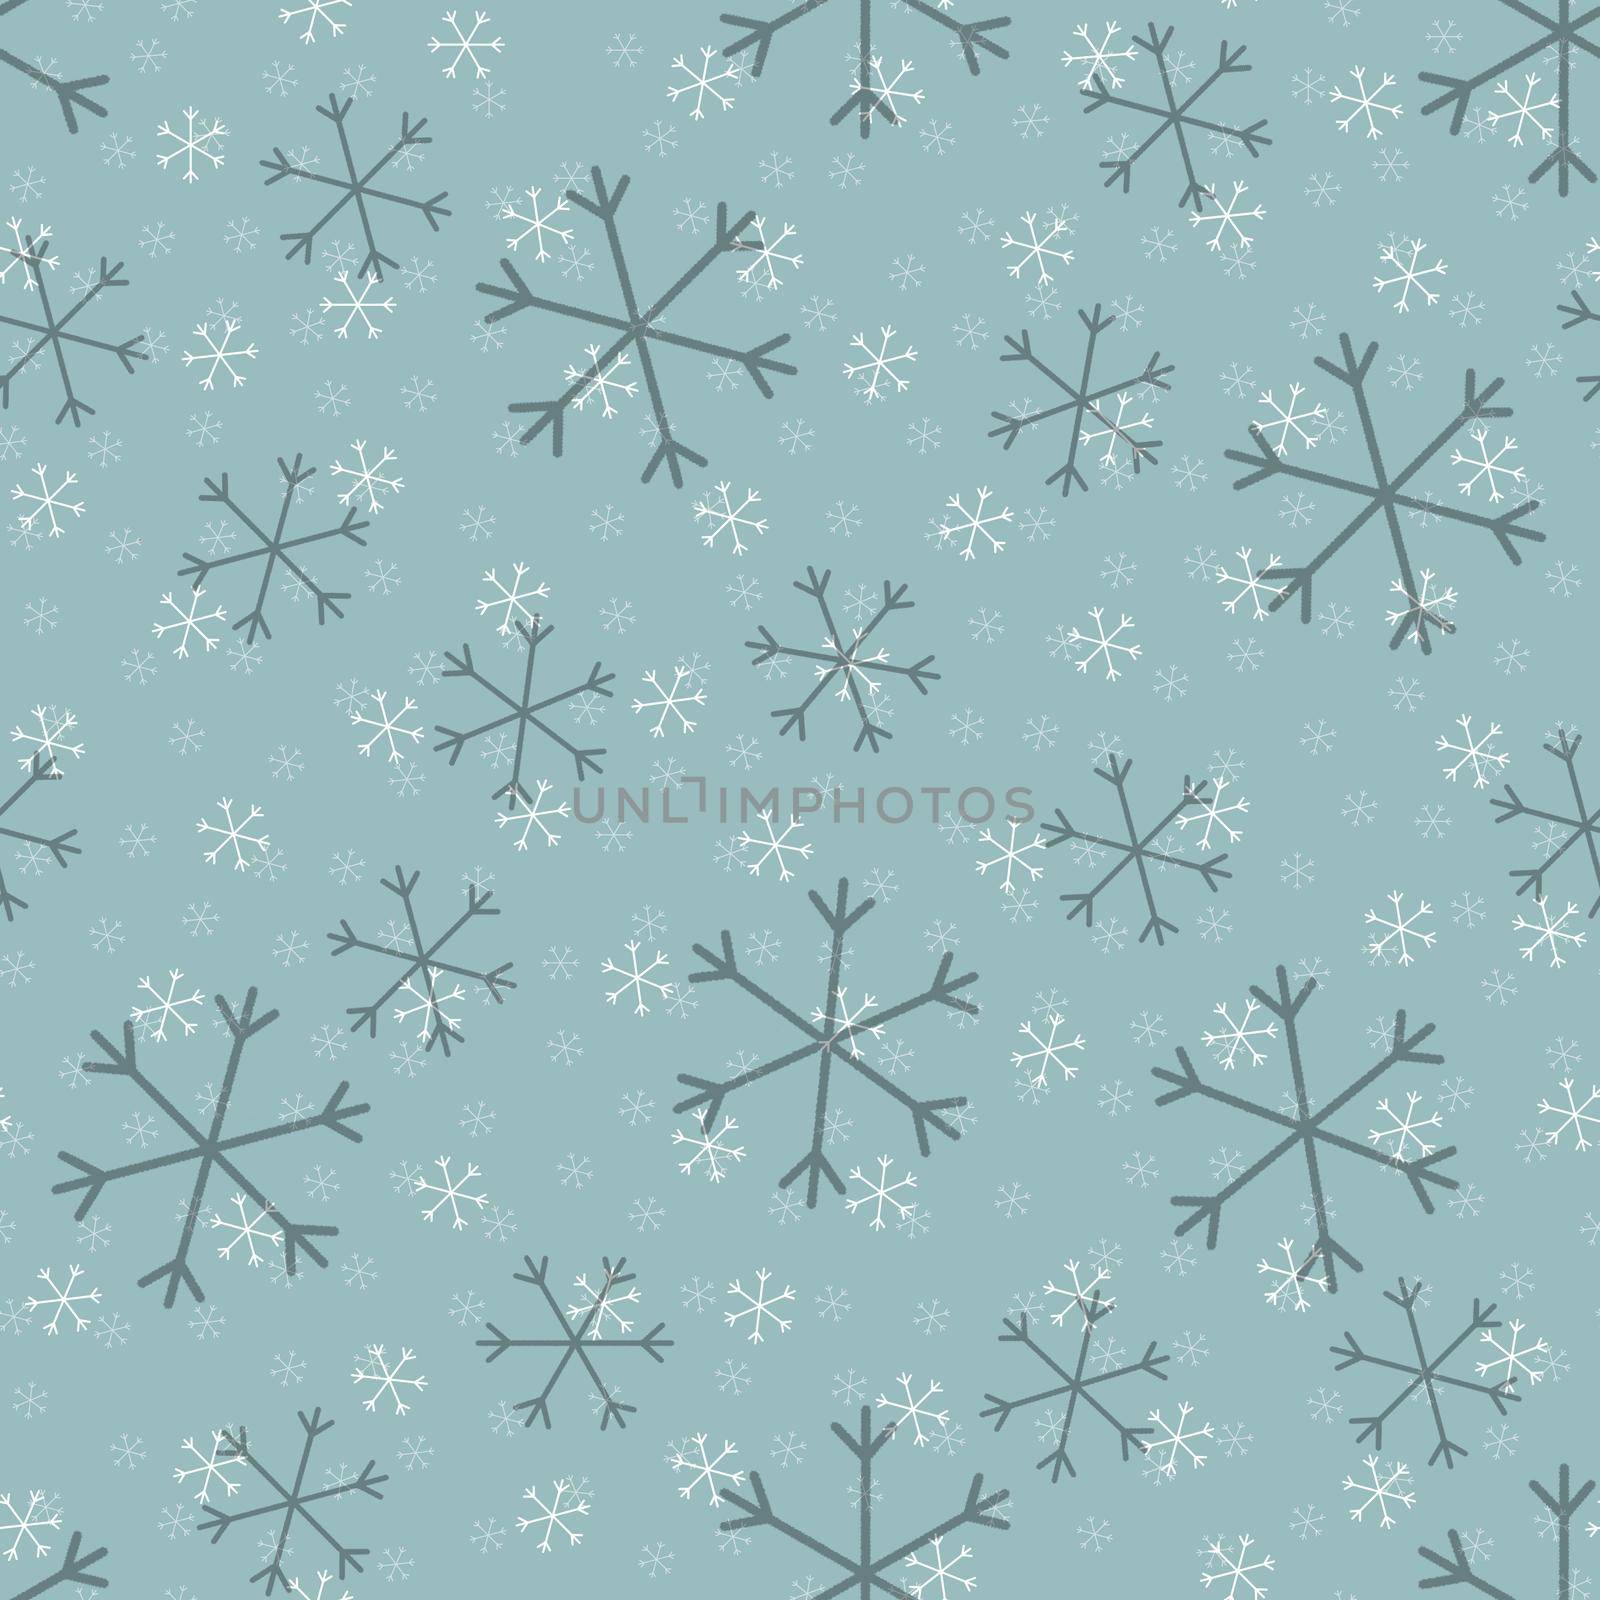 Seamless Christmas pattern doodle with hand random drawn snowflakes.Wrapping paper for presents, funny textile fabric print, design,decor, food wrap, backgrounds. new year.Raster copy.Sky gray, lilac by Angelsmoon